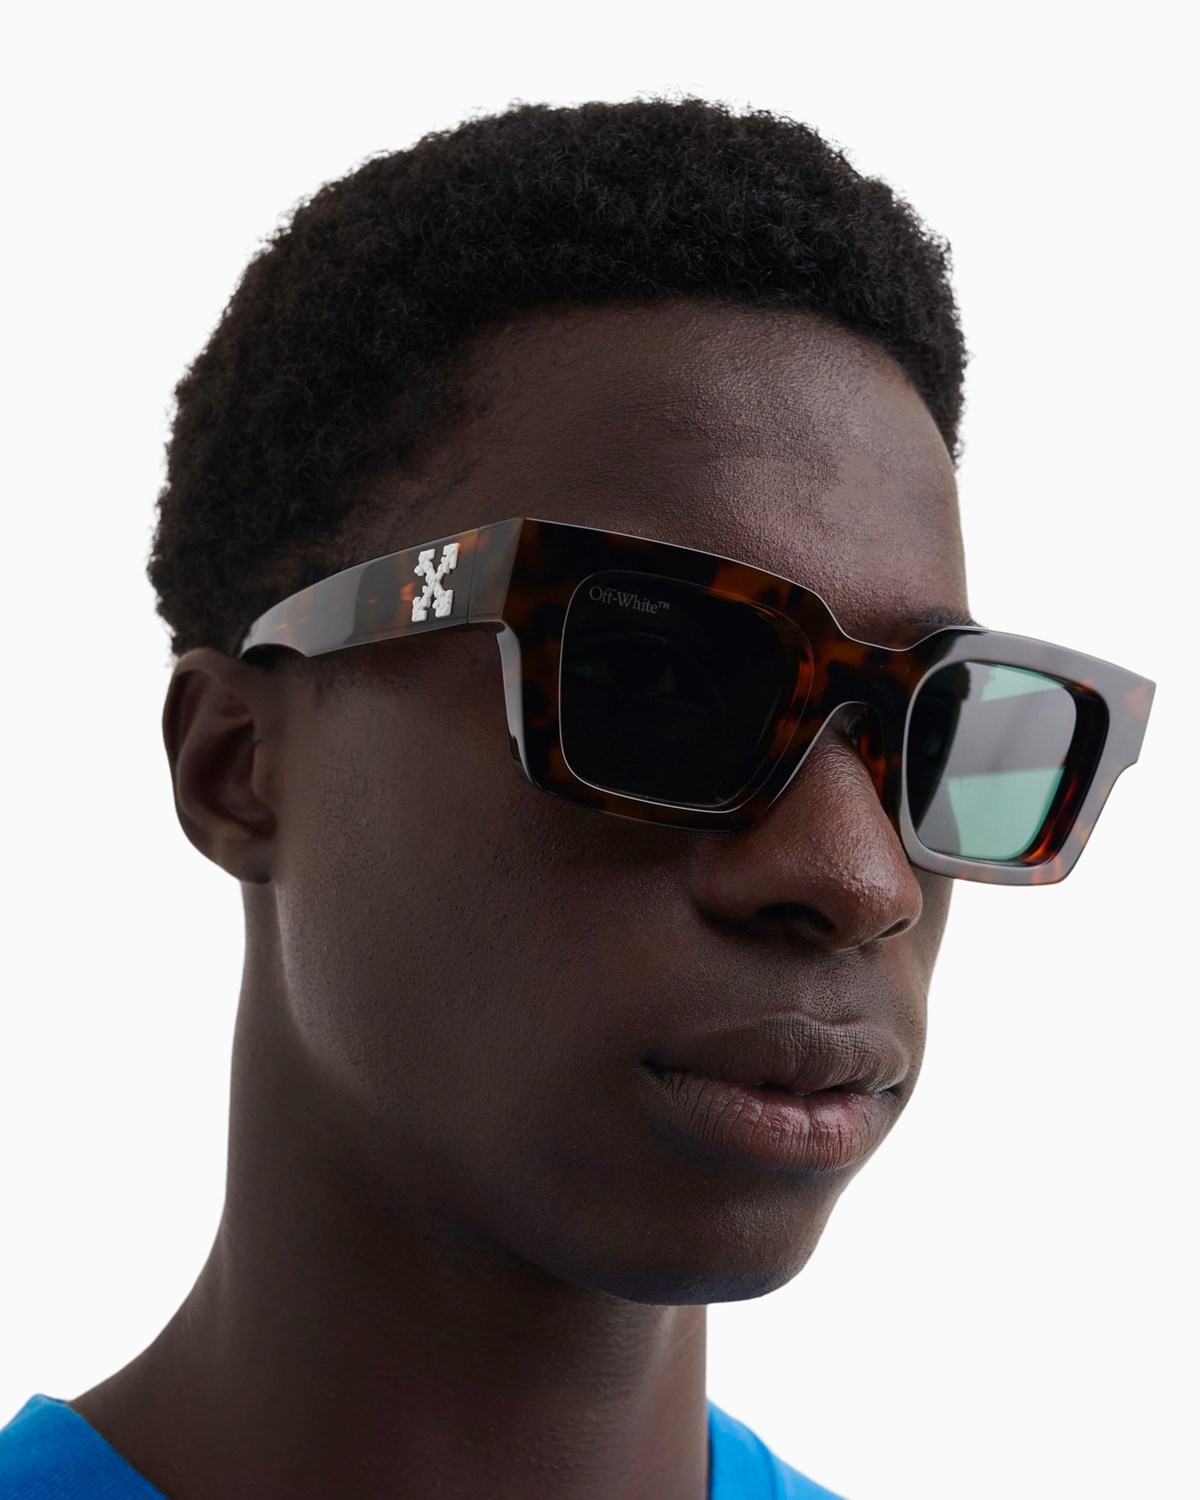 Virgil Sunglasses Off-White Accessories_Other Sunglasses Green